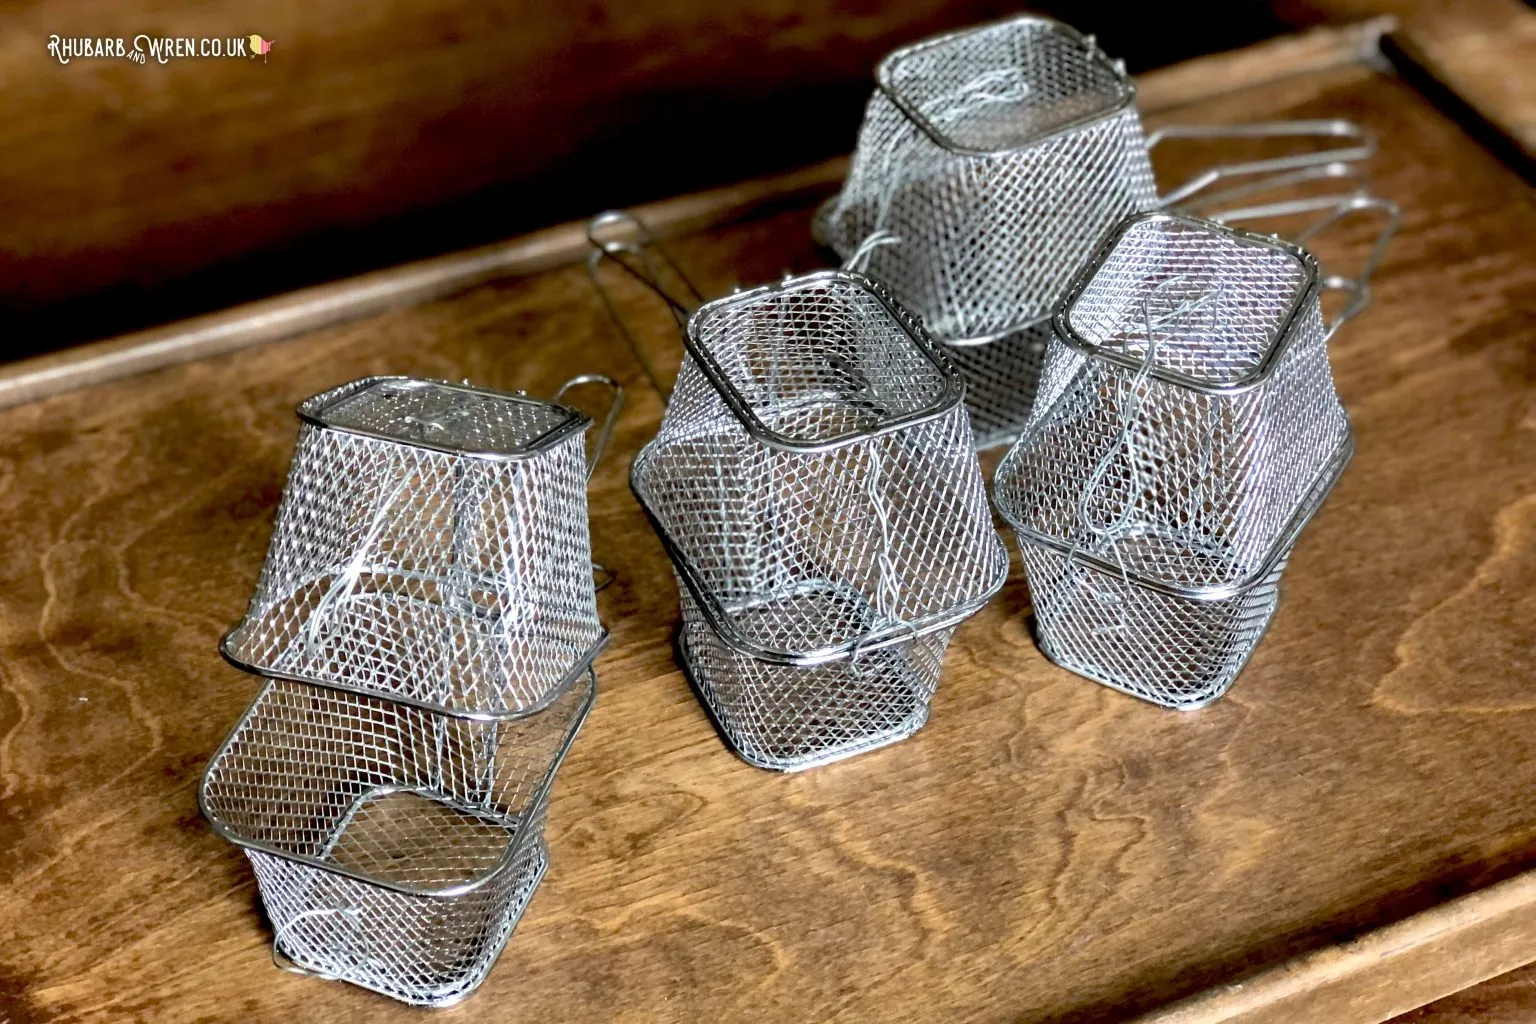 Making campfire popcorn cages